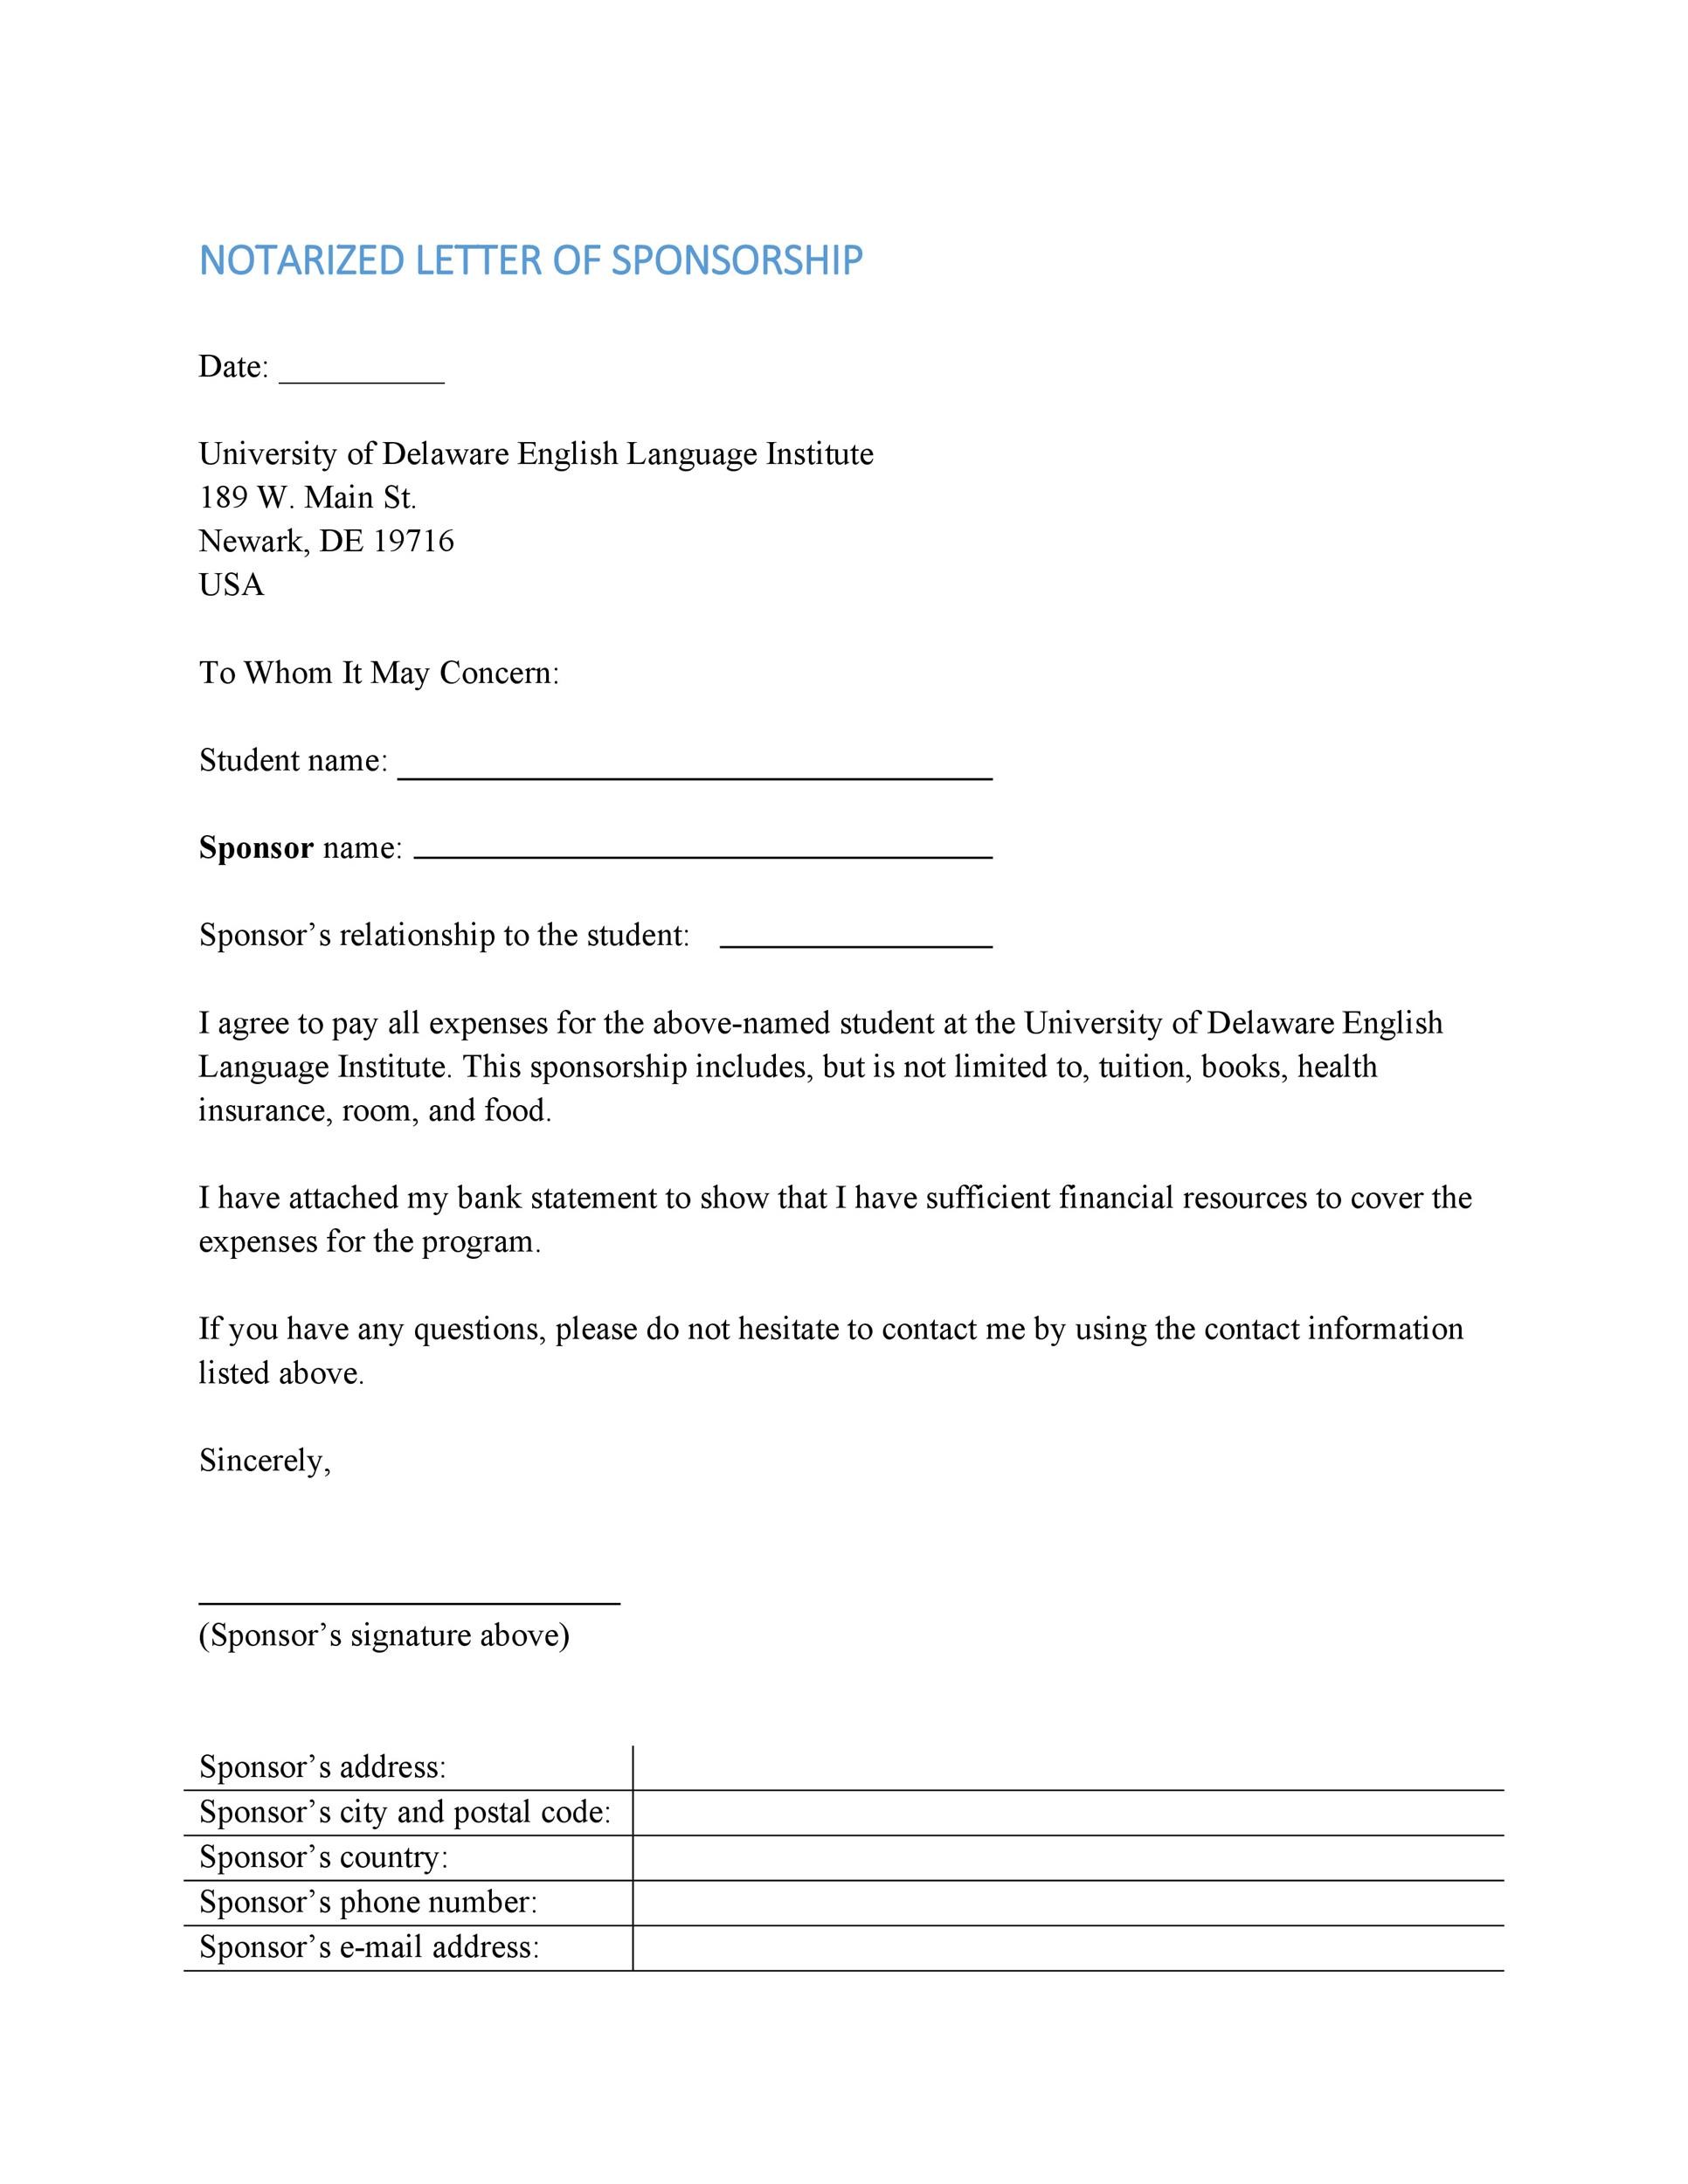 Free Notarized Letter Template 21